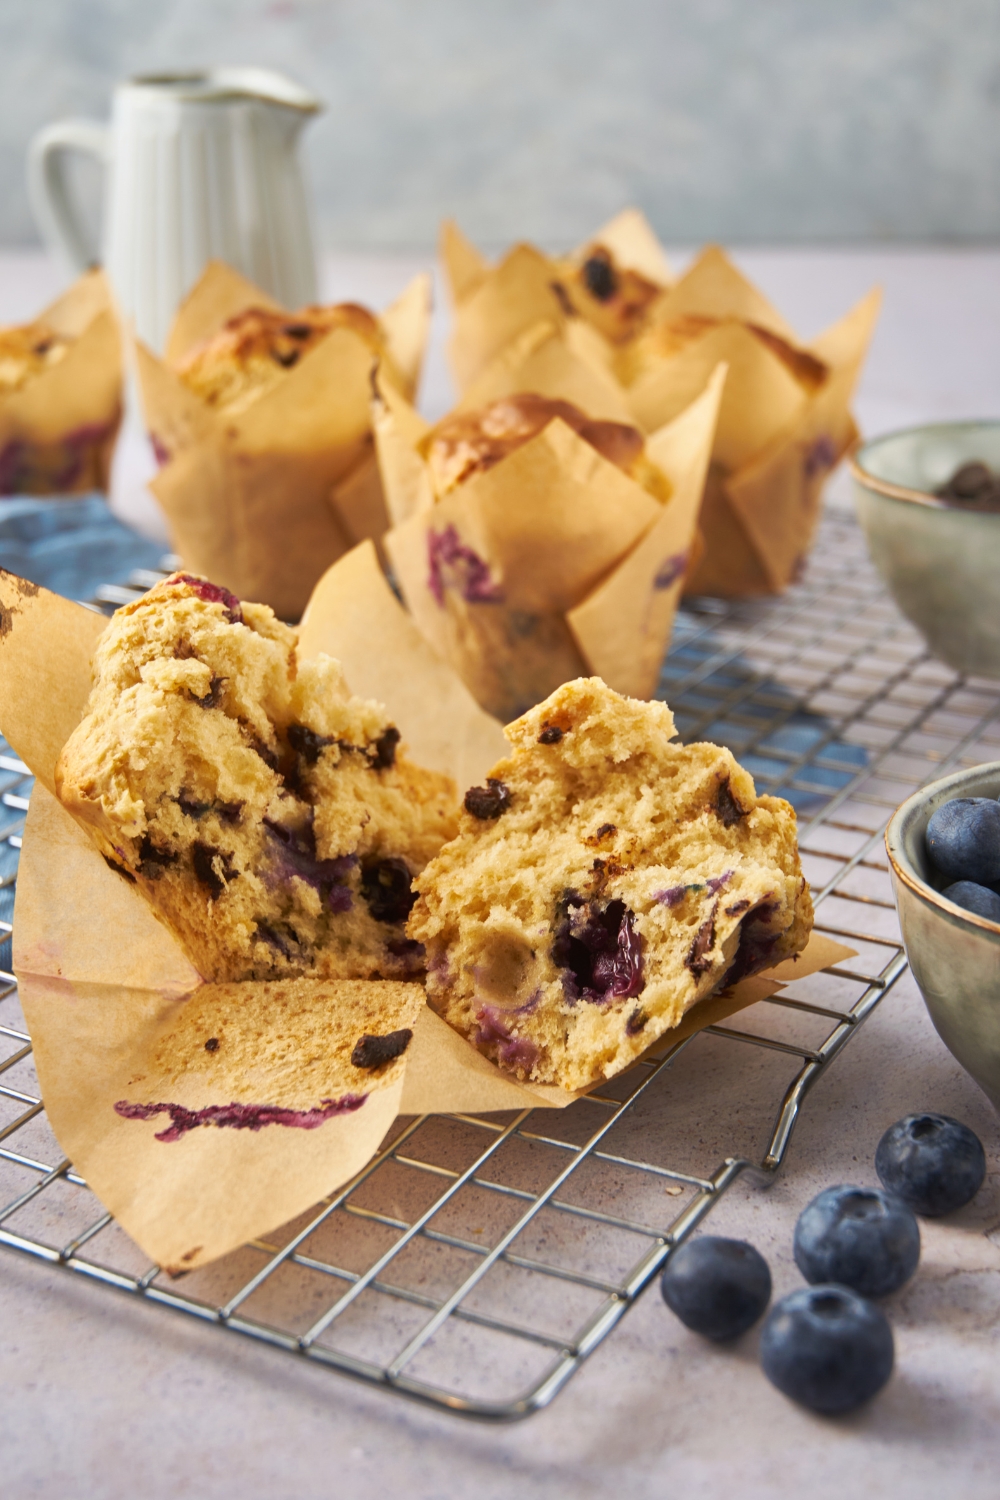 A blueberry muffin that's been cut in half and is cooling on a wire rack. The rest of the muffins are in the background.